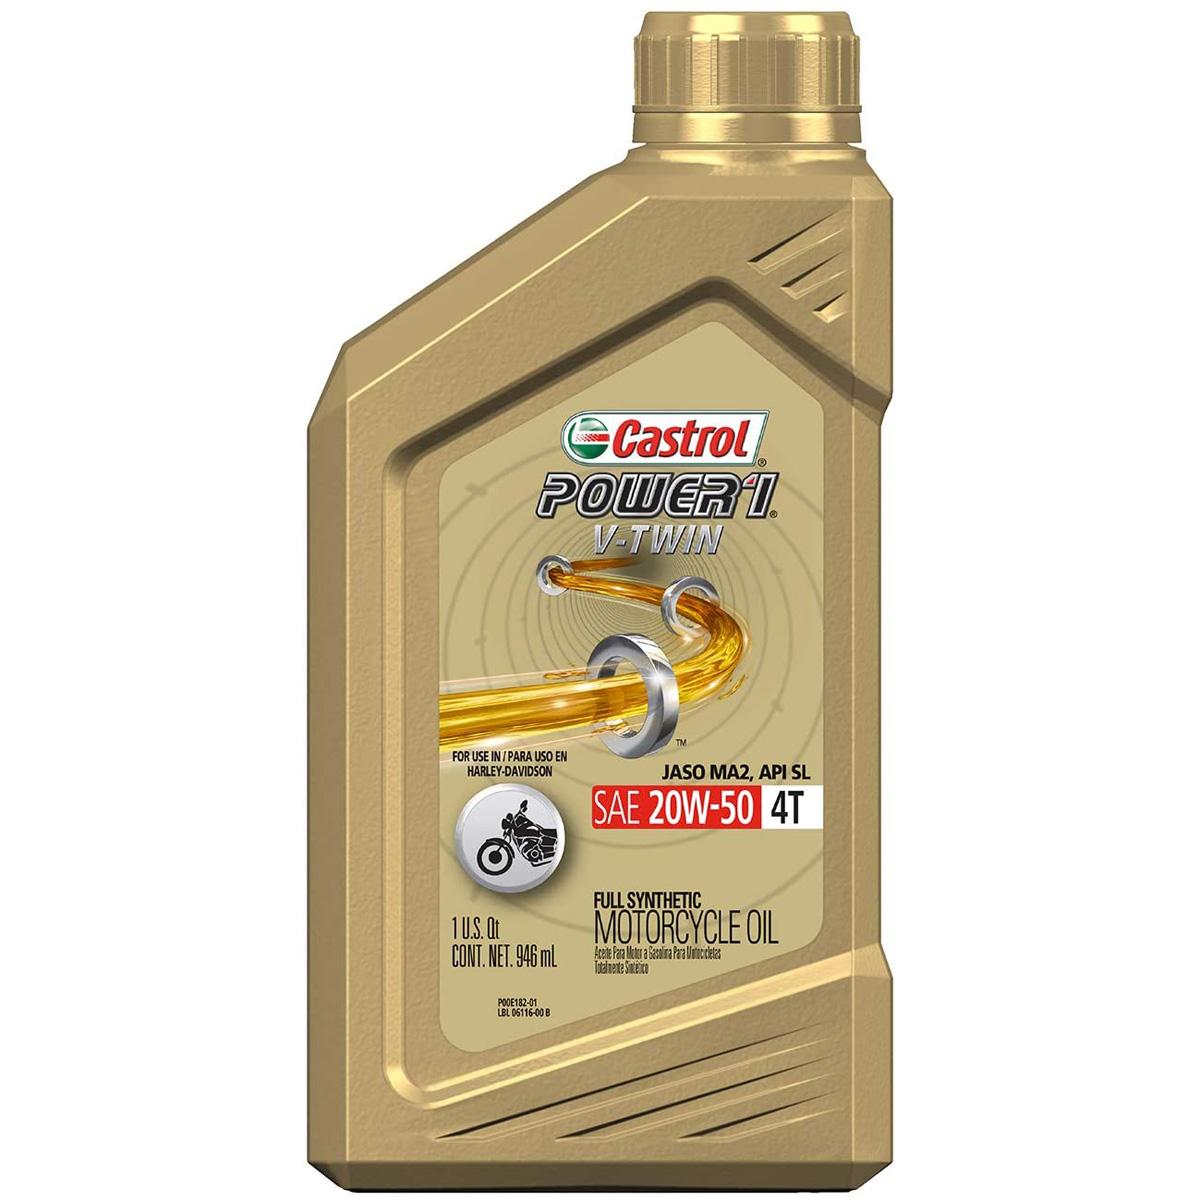 6 Castrol Power1 V-Twin 4T 20W-50 Synthetic Motorcycle Oil for $35.76 Shipped